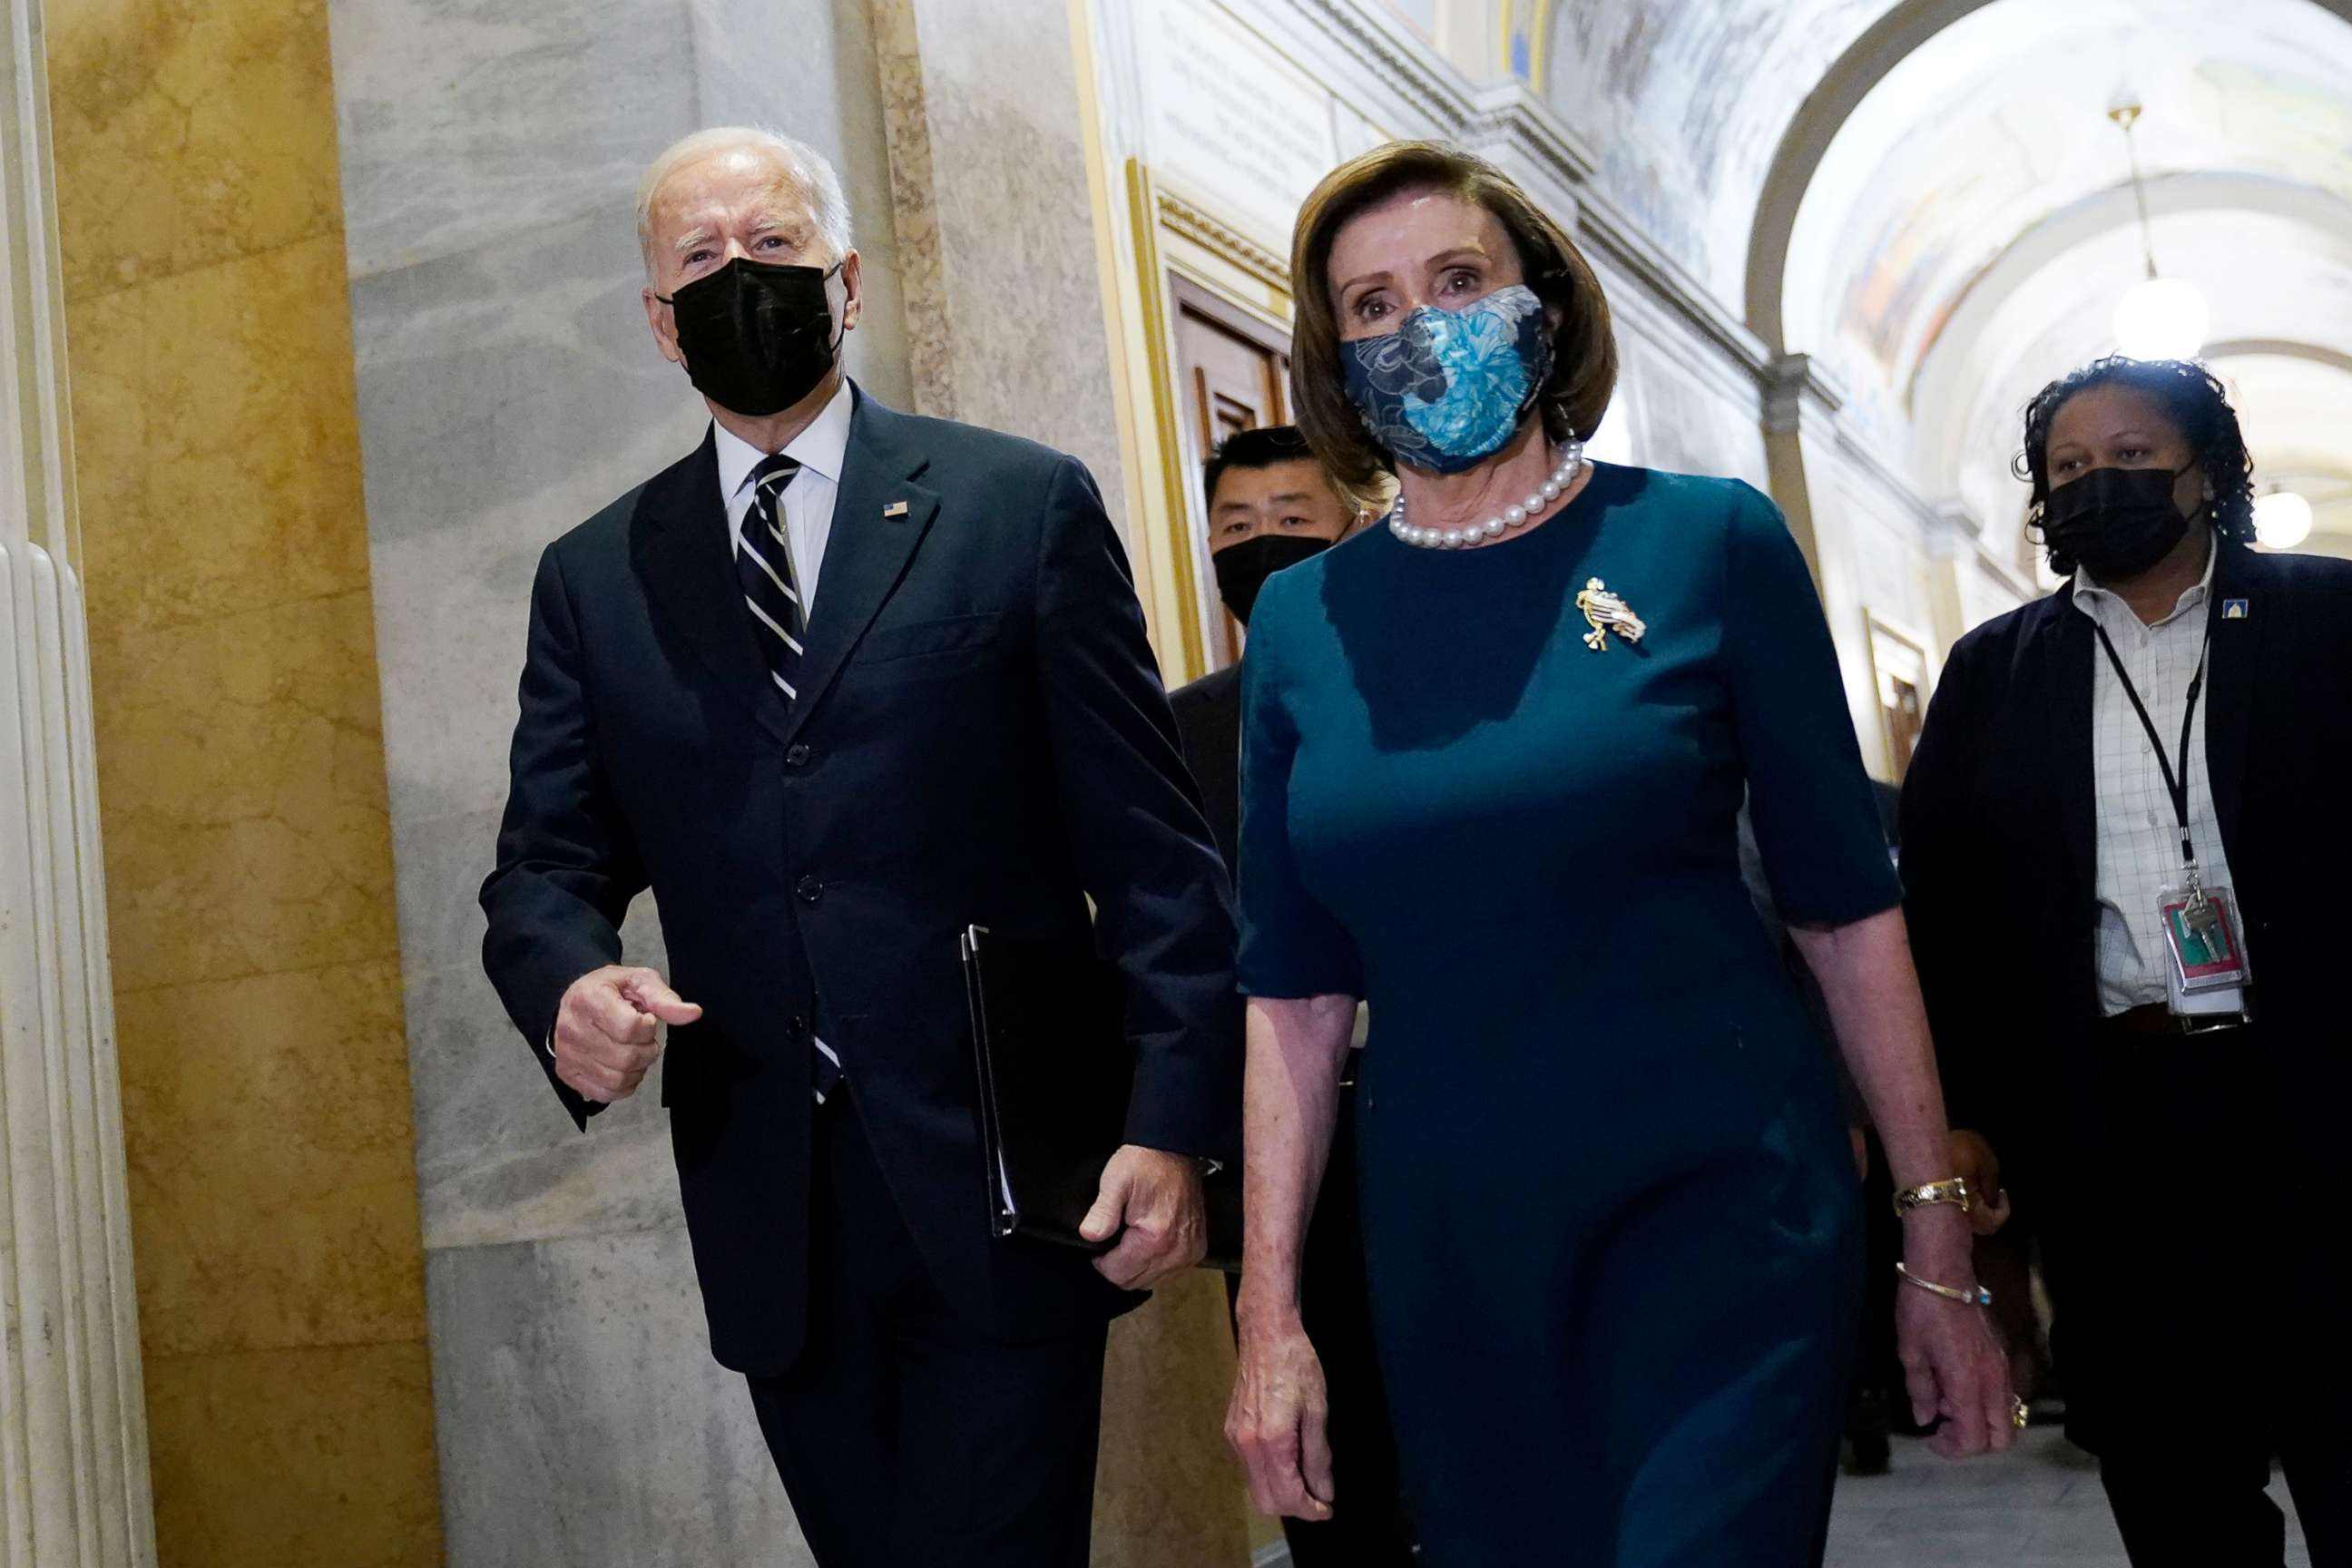 PHOTO: President Biden walks with Speaker of the House Nancy Pelosi on Capitol Hill in Washington, Oct. 28, 2021, during a visit to meet with House Democrats.